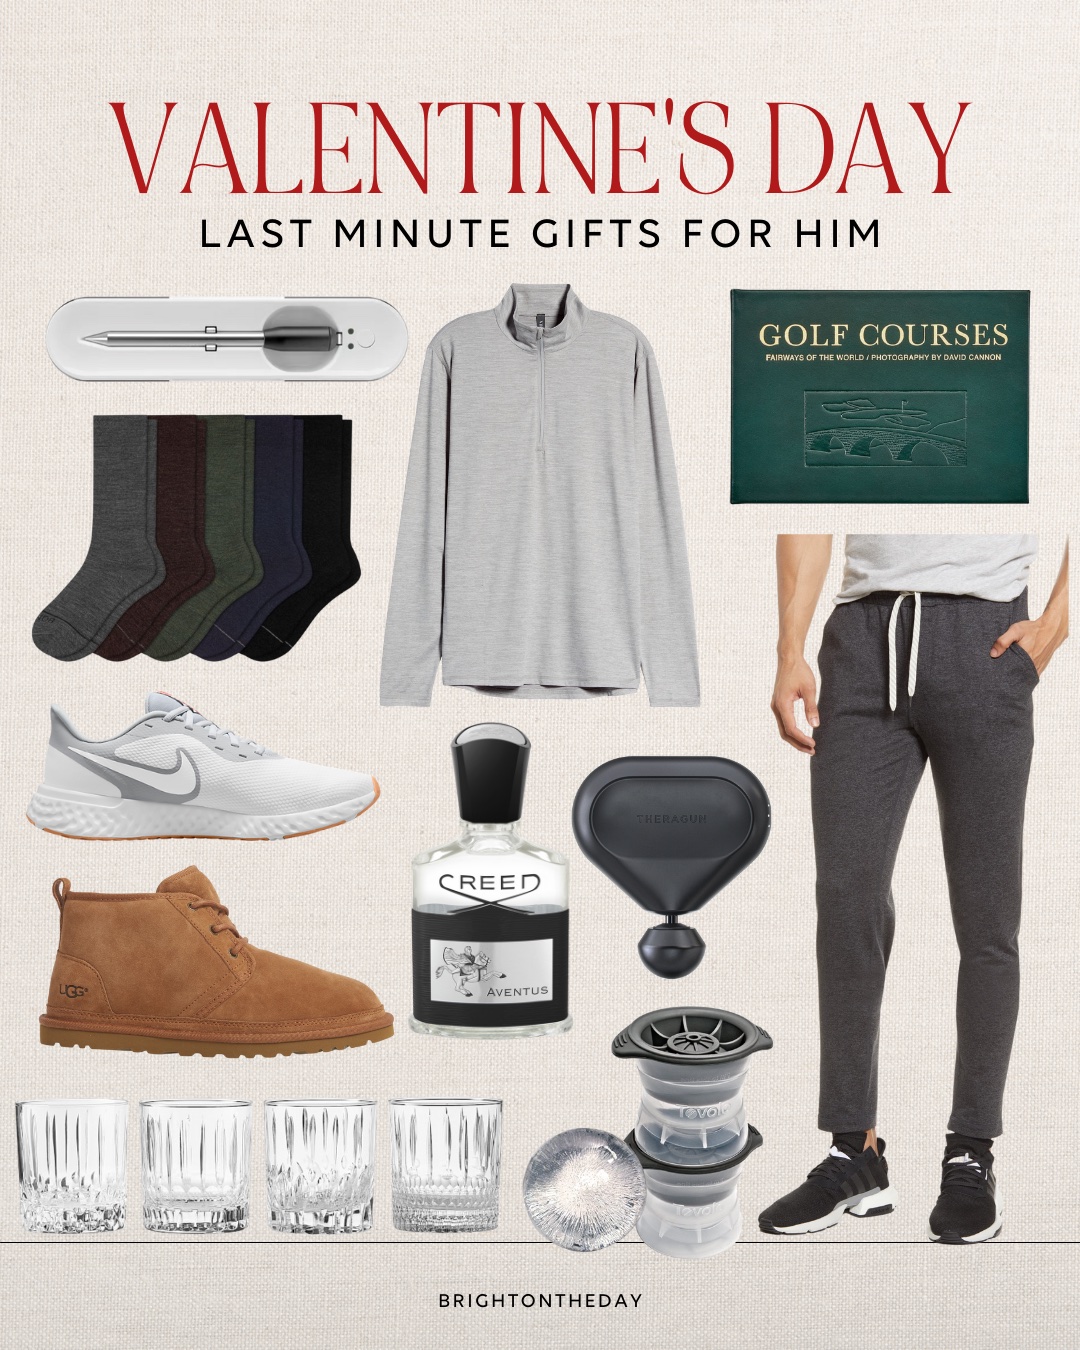 Valentine's Day Last Minute Gifts For Him Brighton Butler